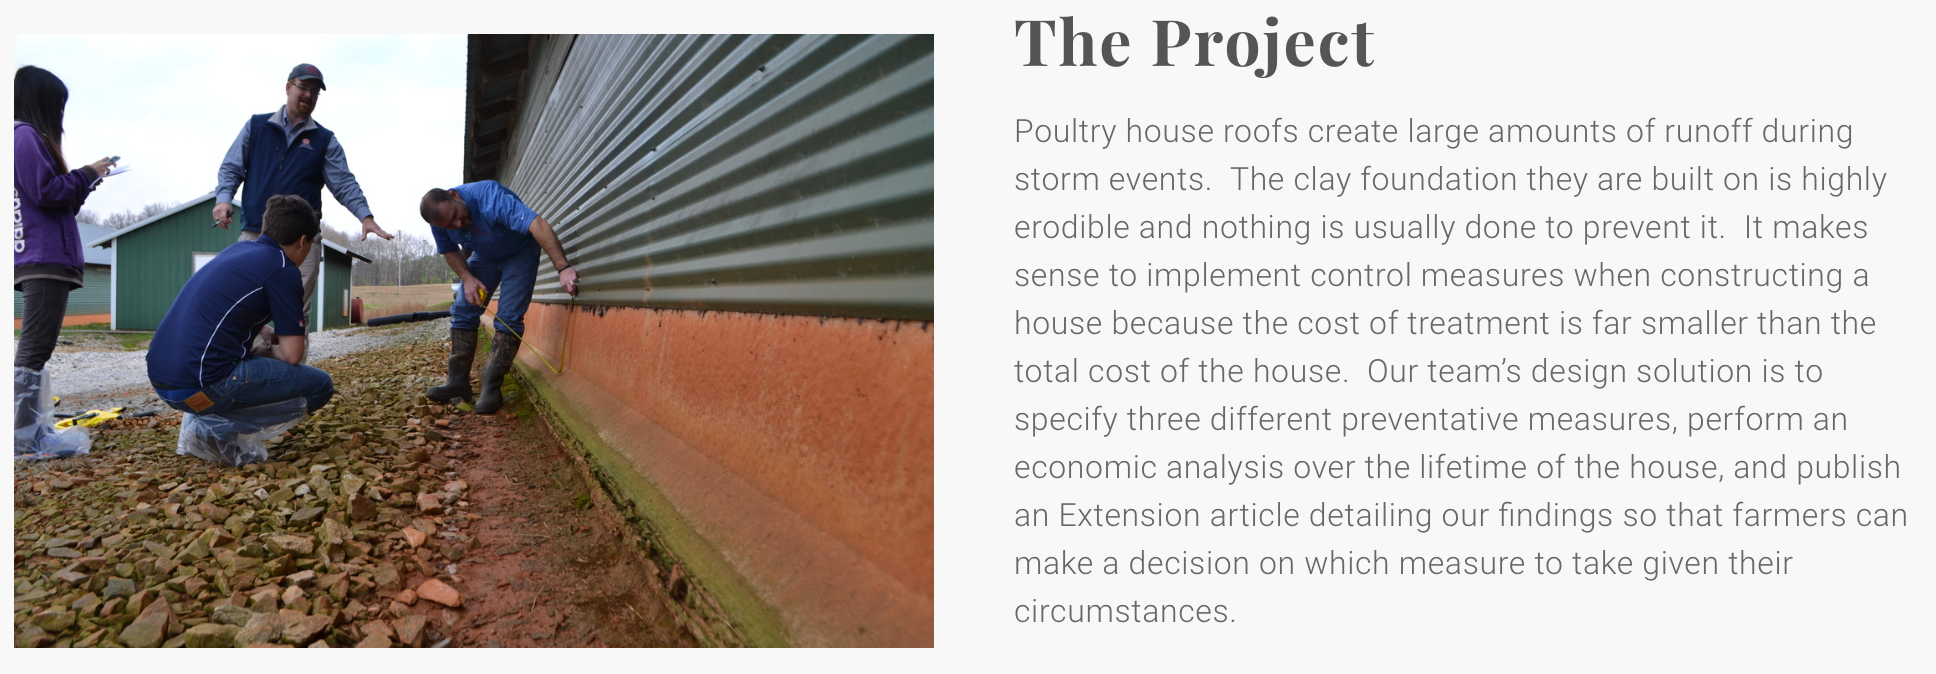 Students and faculty work together to prevent the erosion of clay pads surrounding poultry houses.